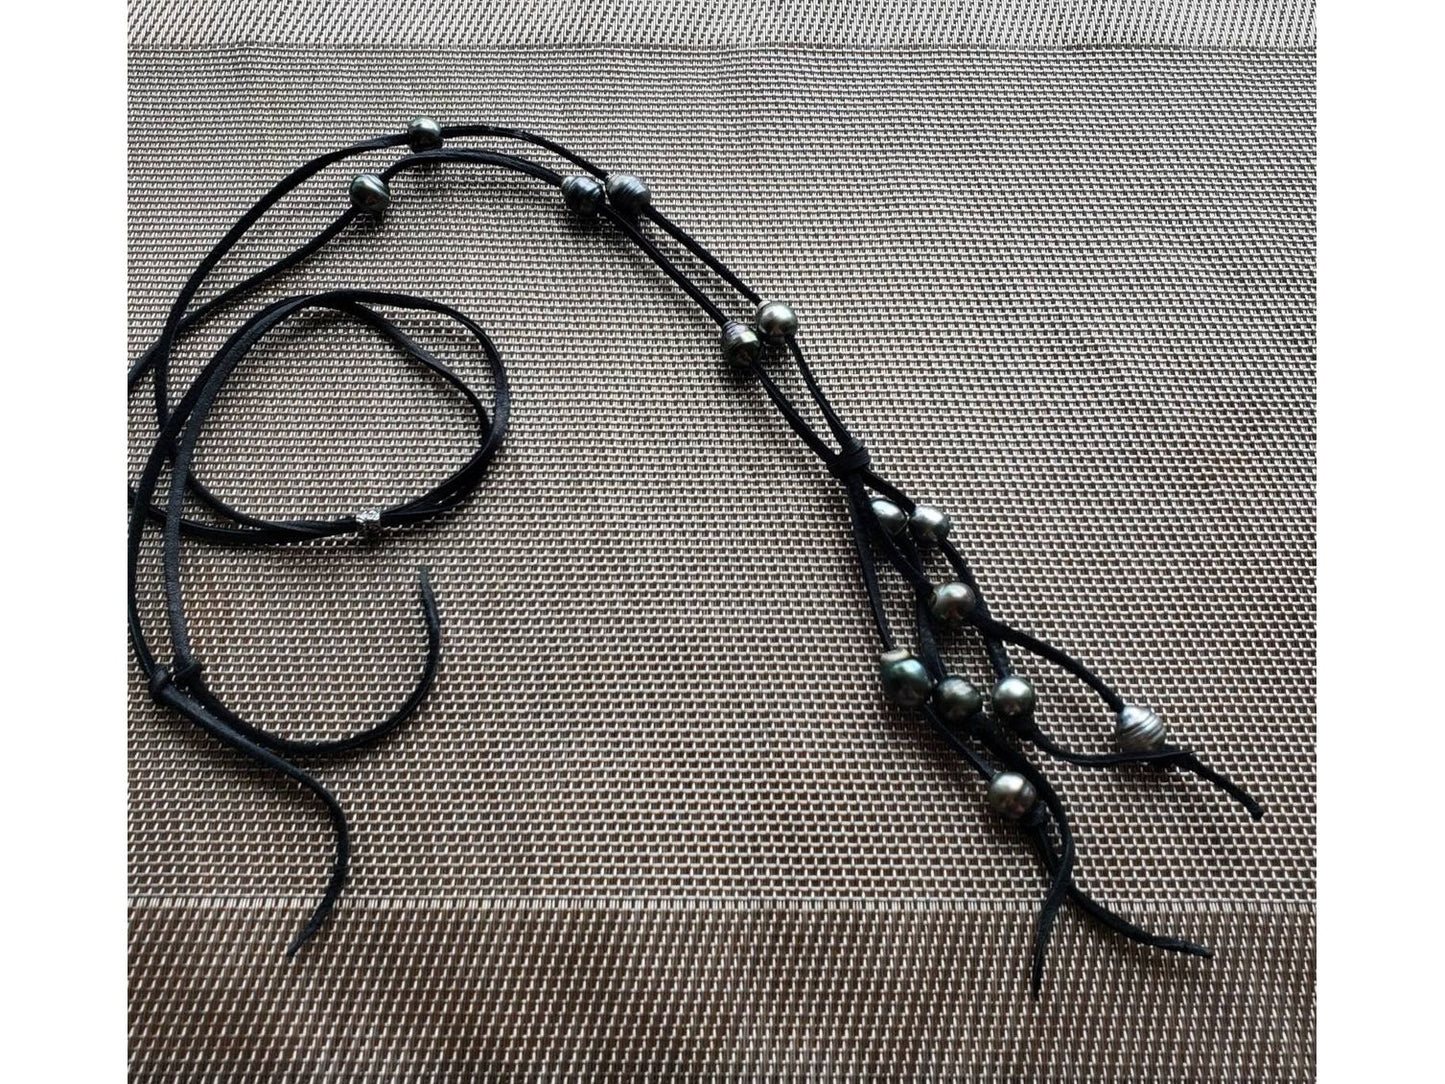 Black Tahitian pearls suede leather necklace, lariat style Y necklace, 3rd anniversary gift for wife,